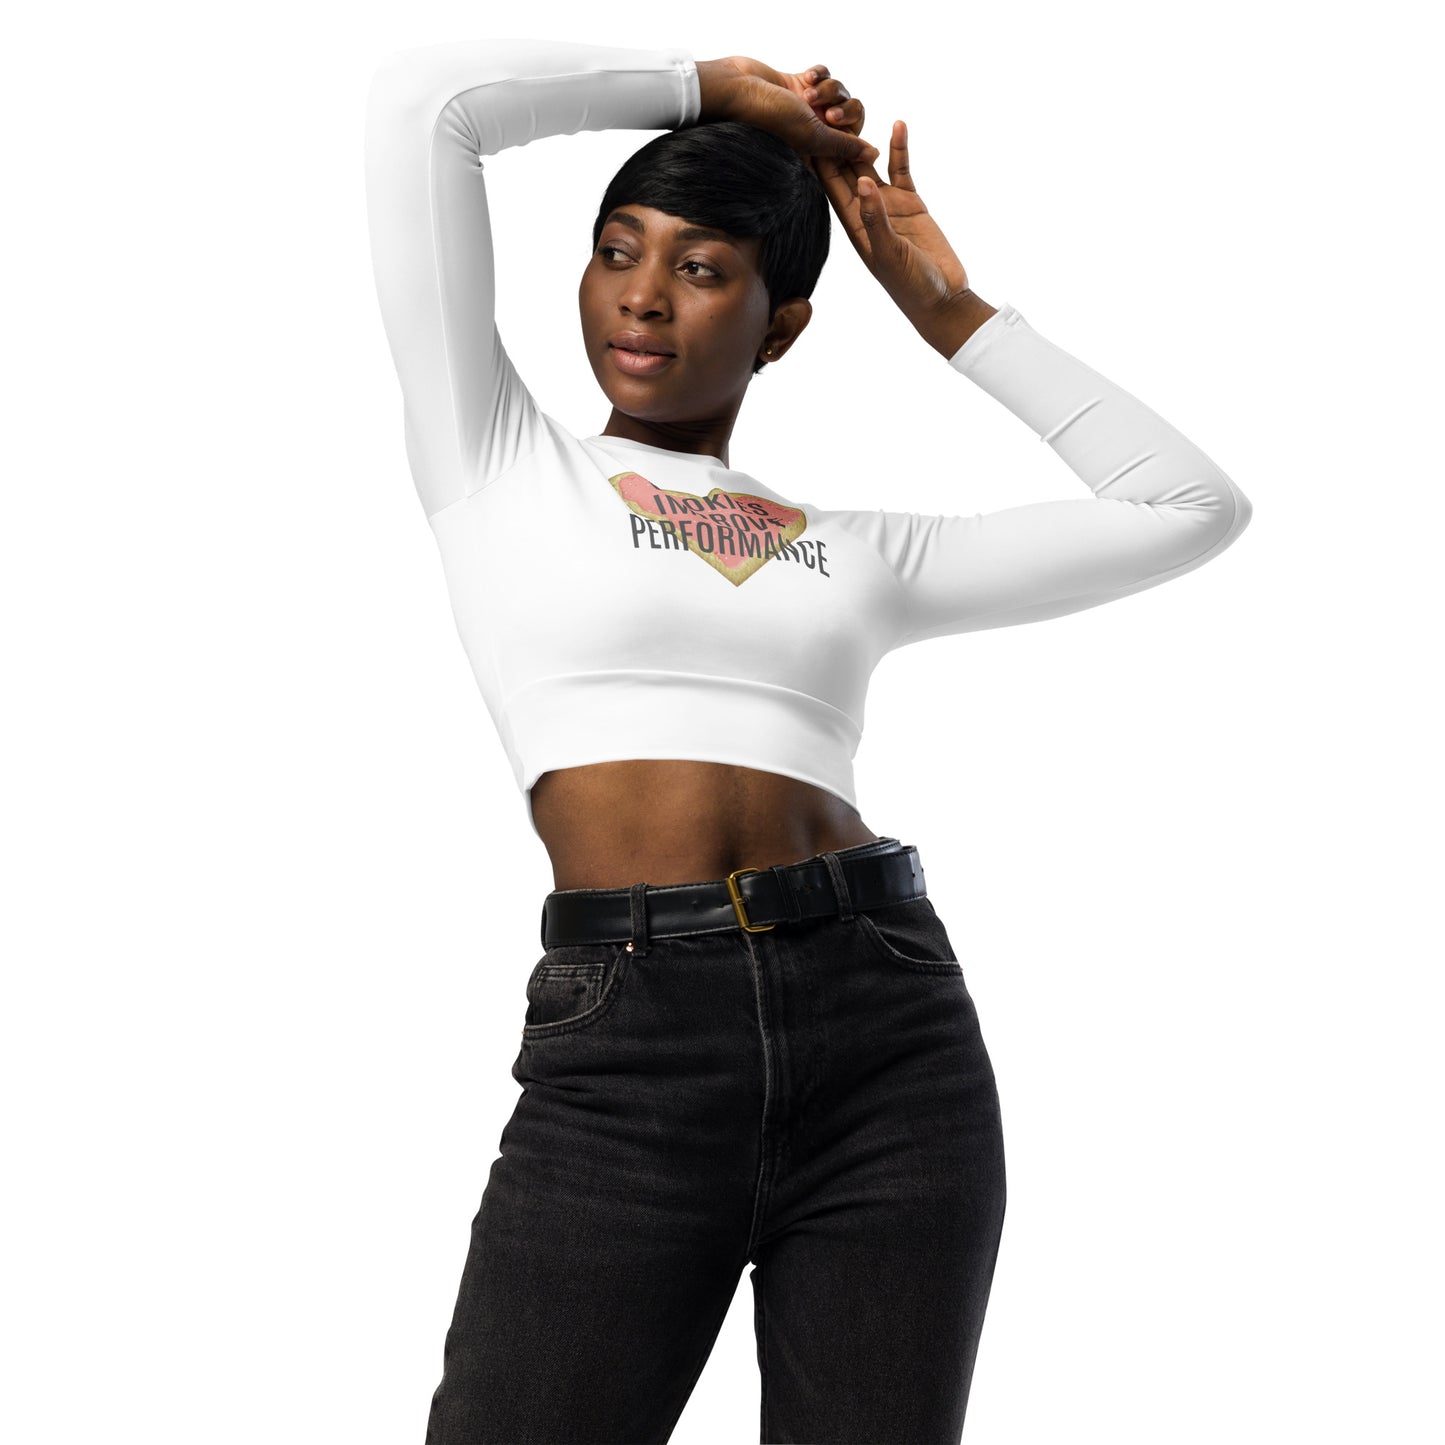 Women's Long-Sleeved Crop Top "COOKIES IMPROVE PERFORMANCE" in Storm Grey on Classic White